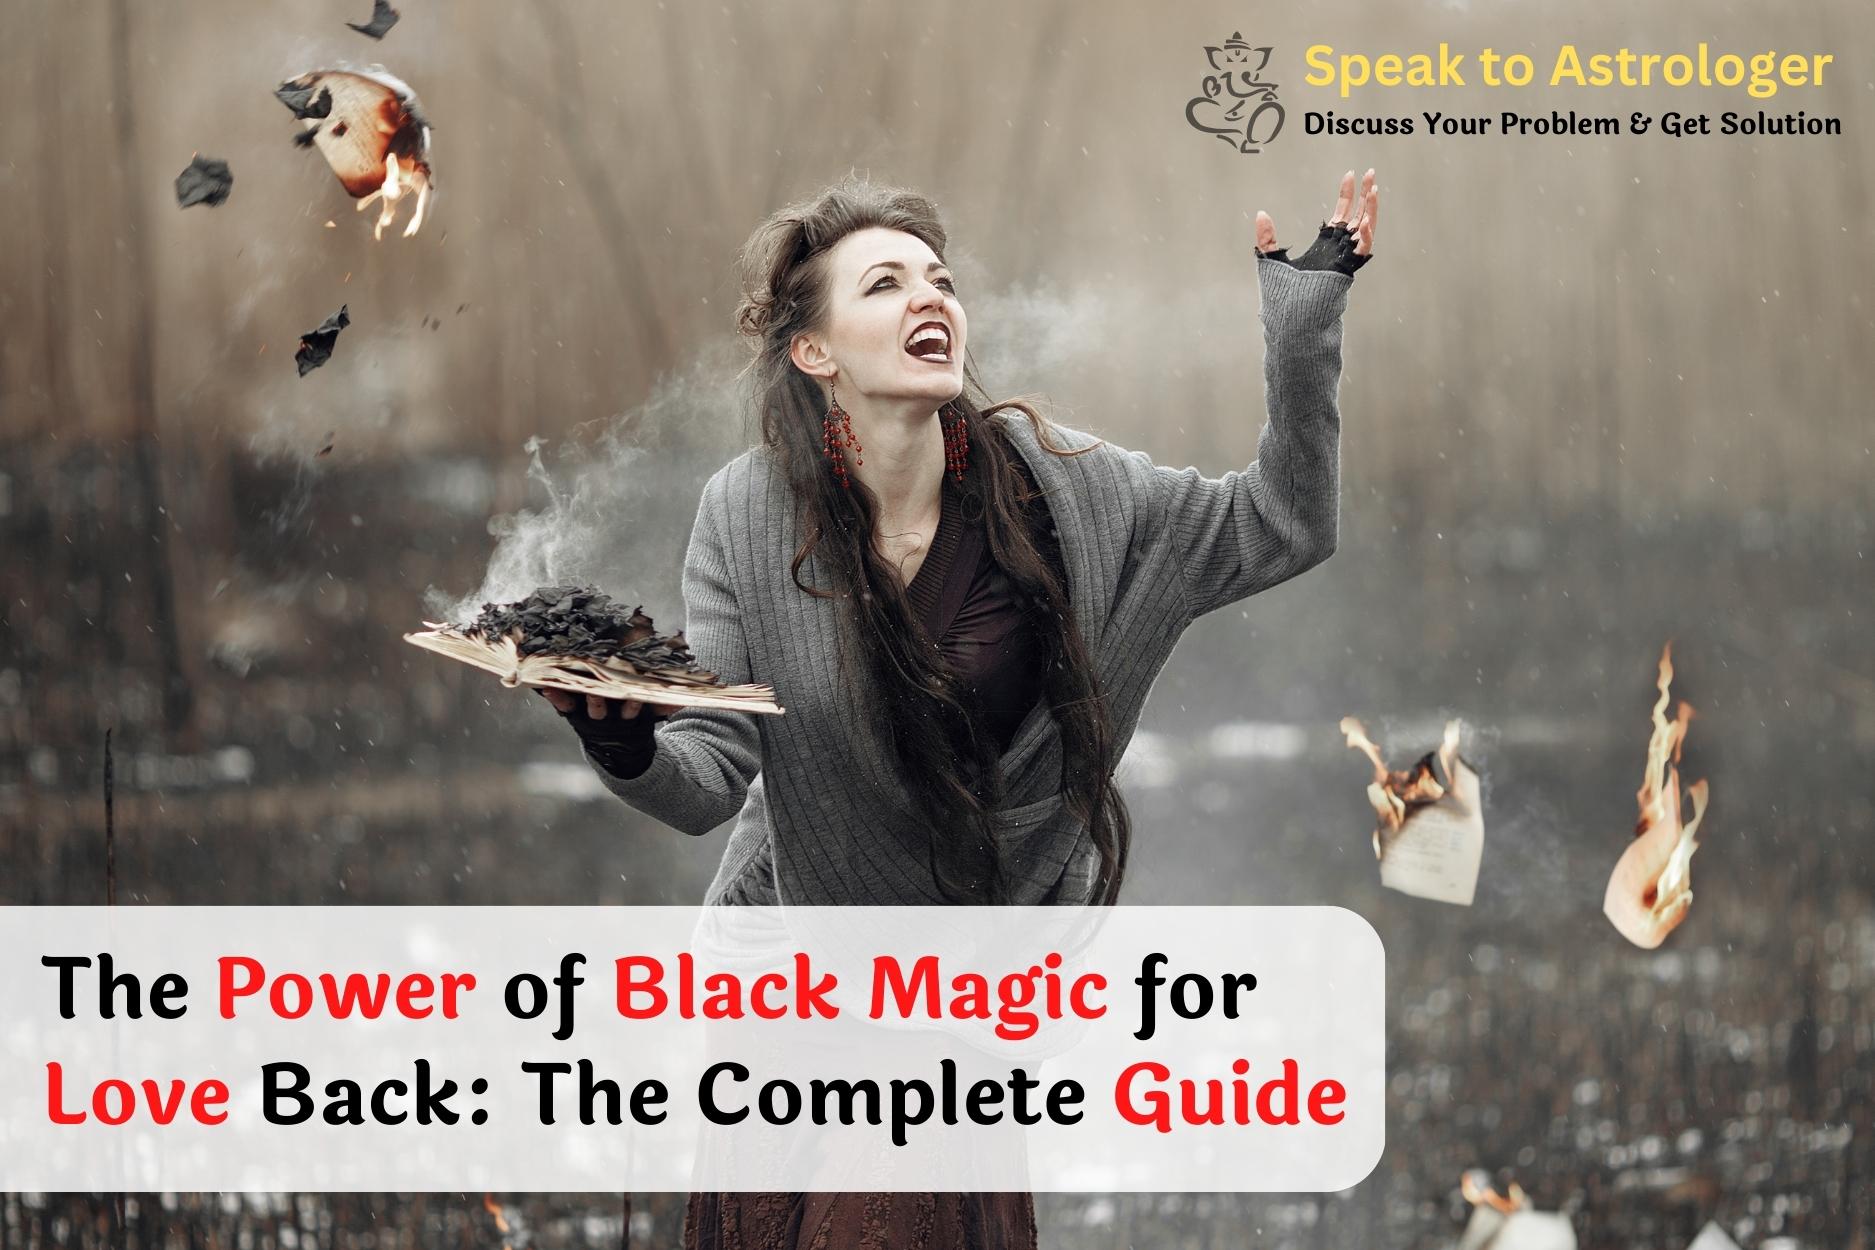 The Power of Black Magic for Love Back: The Complete Guide